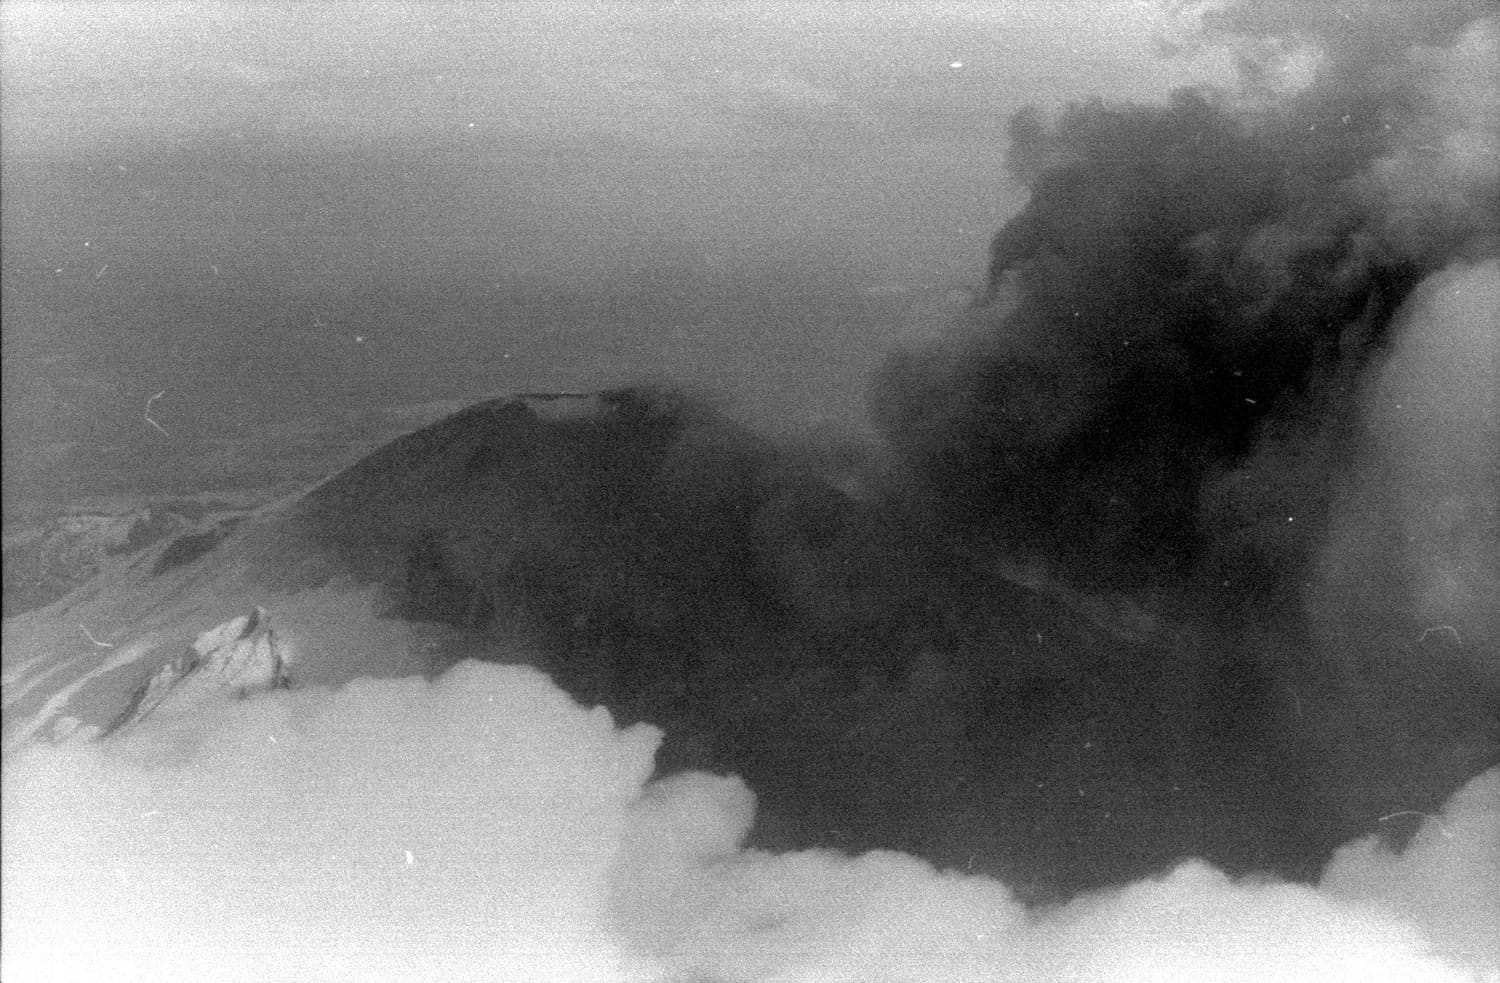 A plume rises from Mount St. Helens in early April 1980.